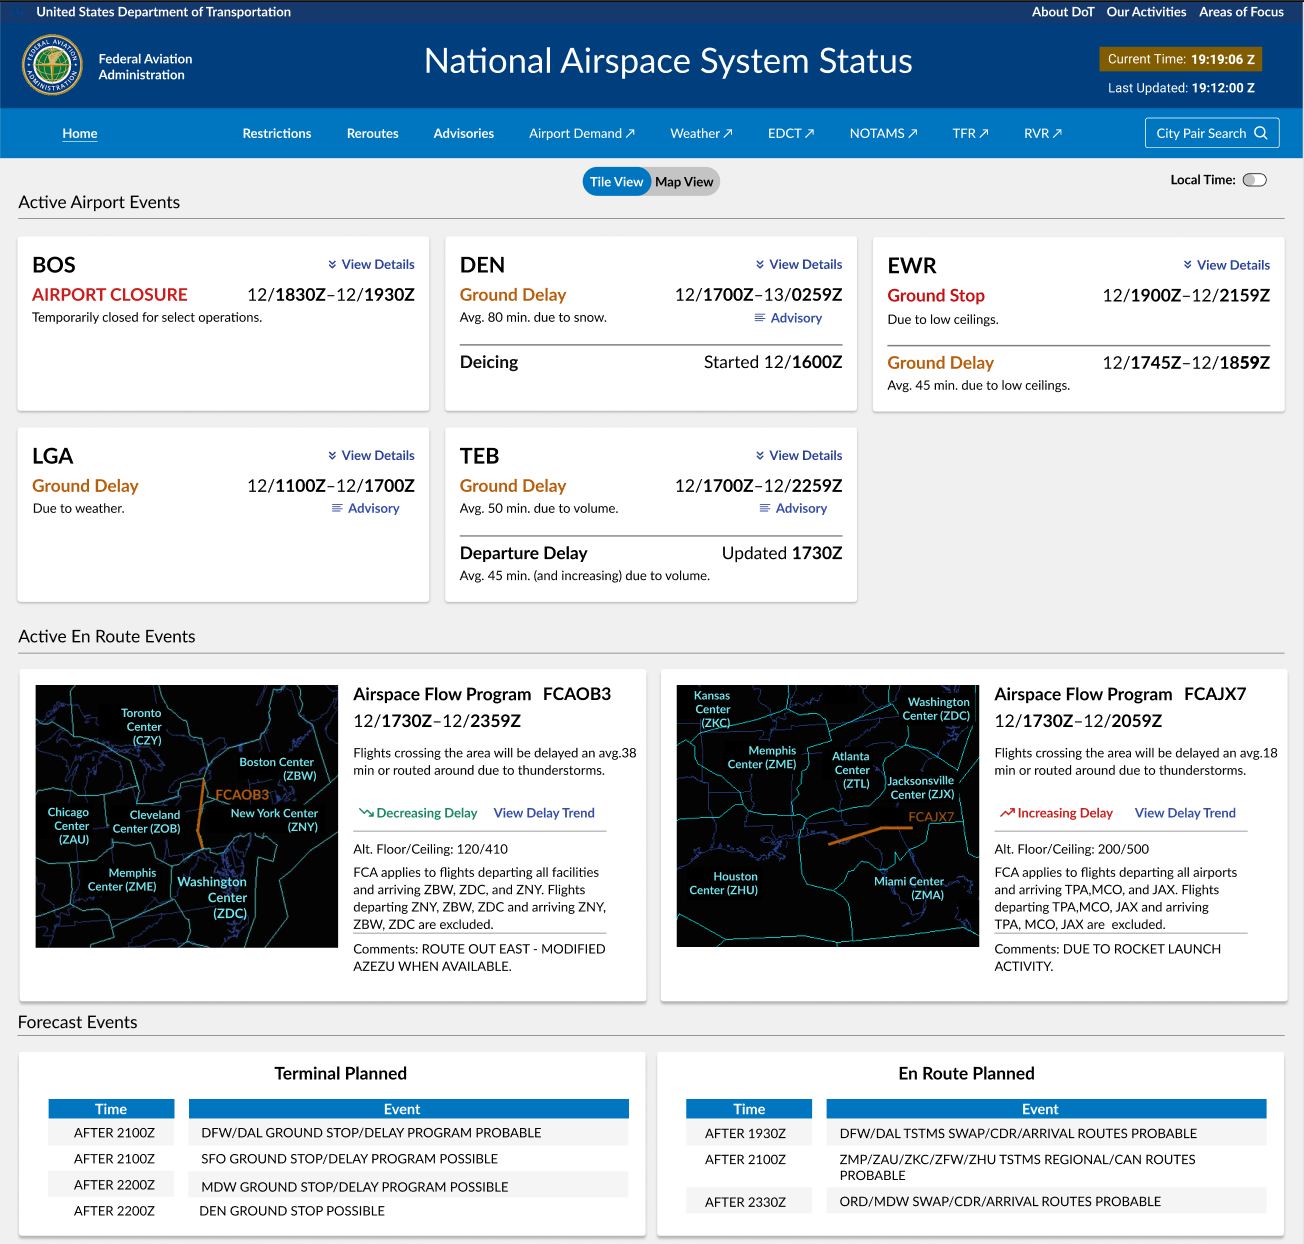 The first release of NAS contains three main sections: airport events, airspace events, and upcoming events.